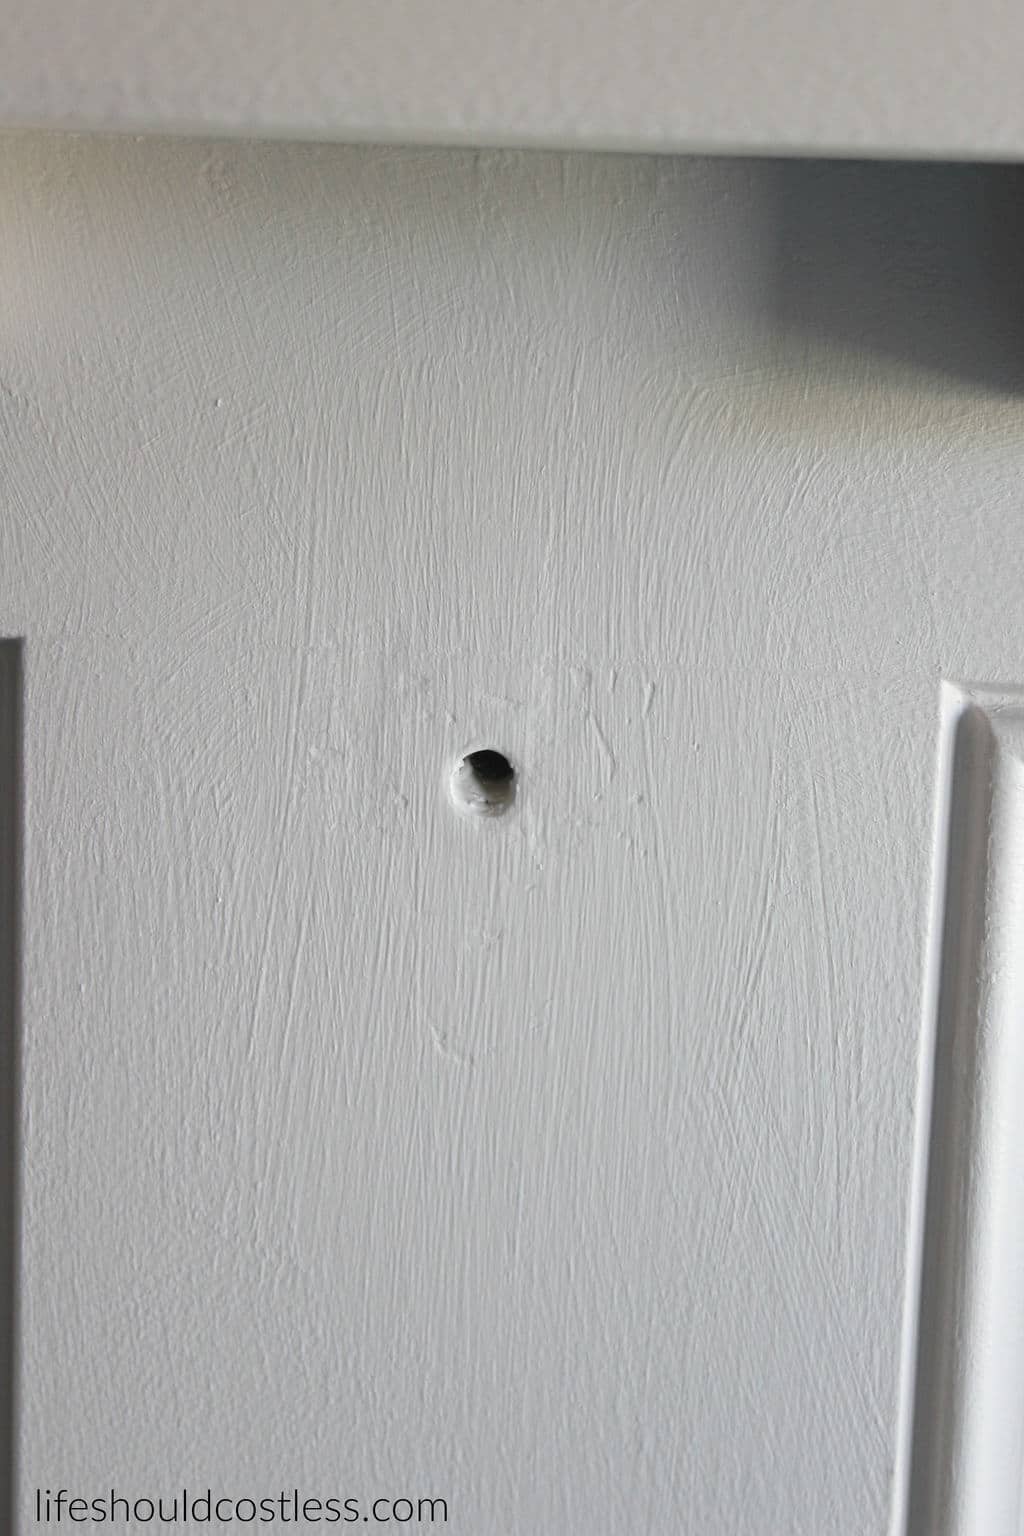 DIY How to install a peep hole in your front door. It's so easy and inexpensive! It takes less than five minutes and costs less than ten bucks. See this popular DIY pin and many others at lifeshouldcostless.com.